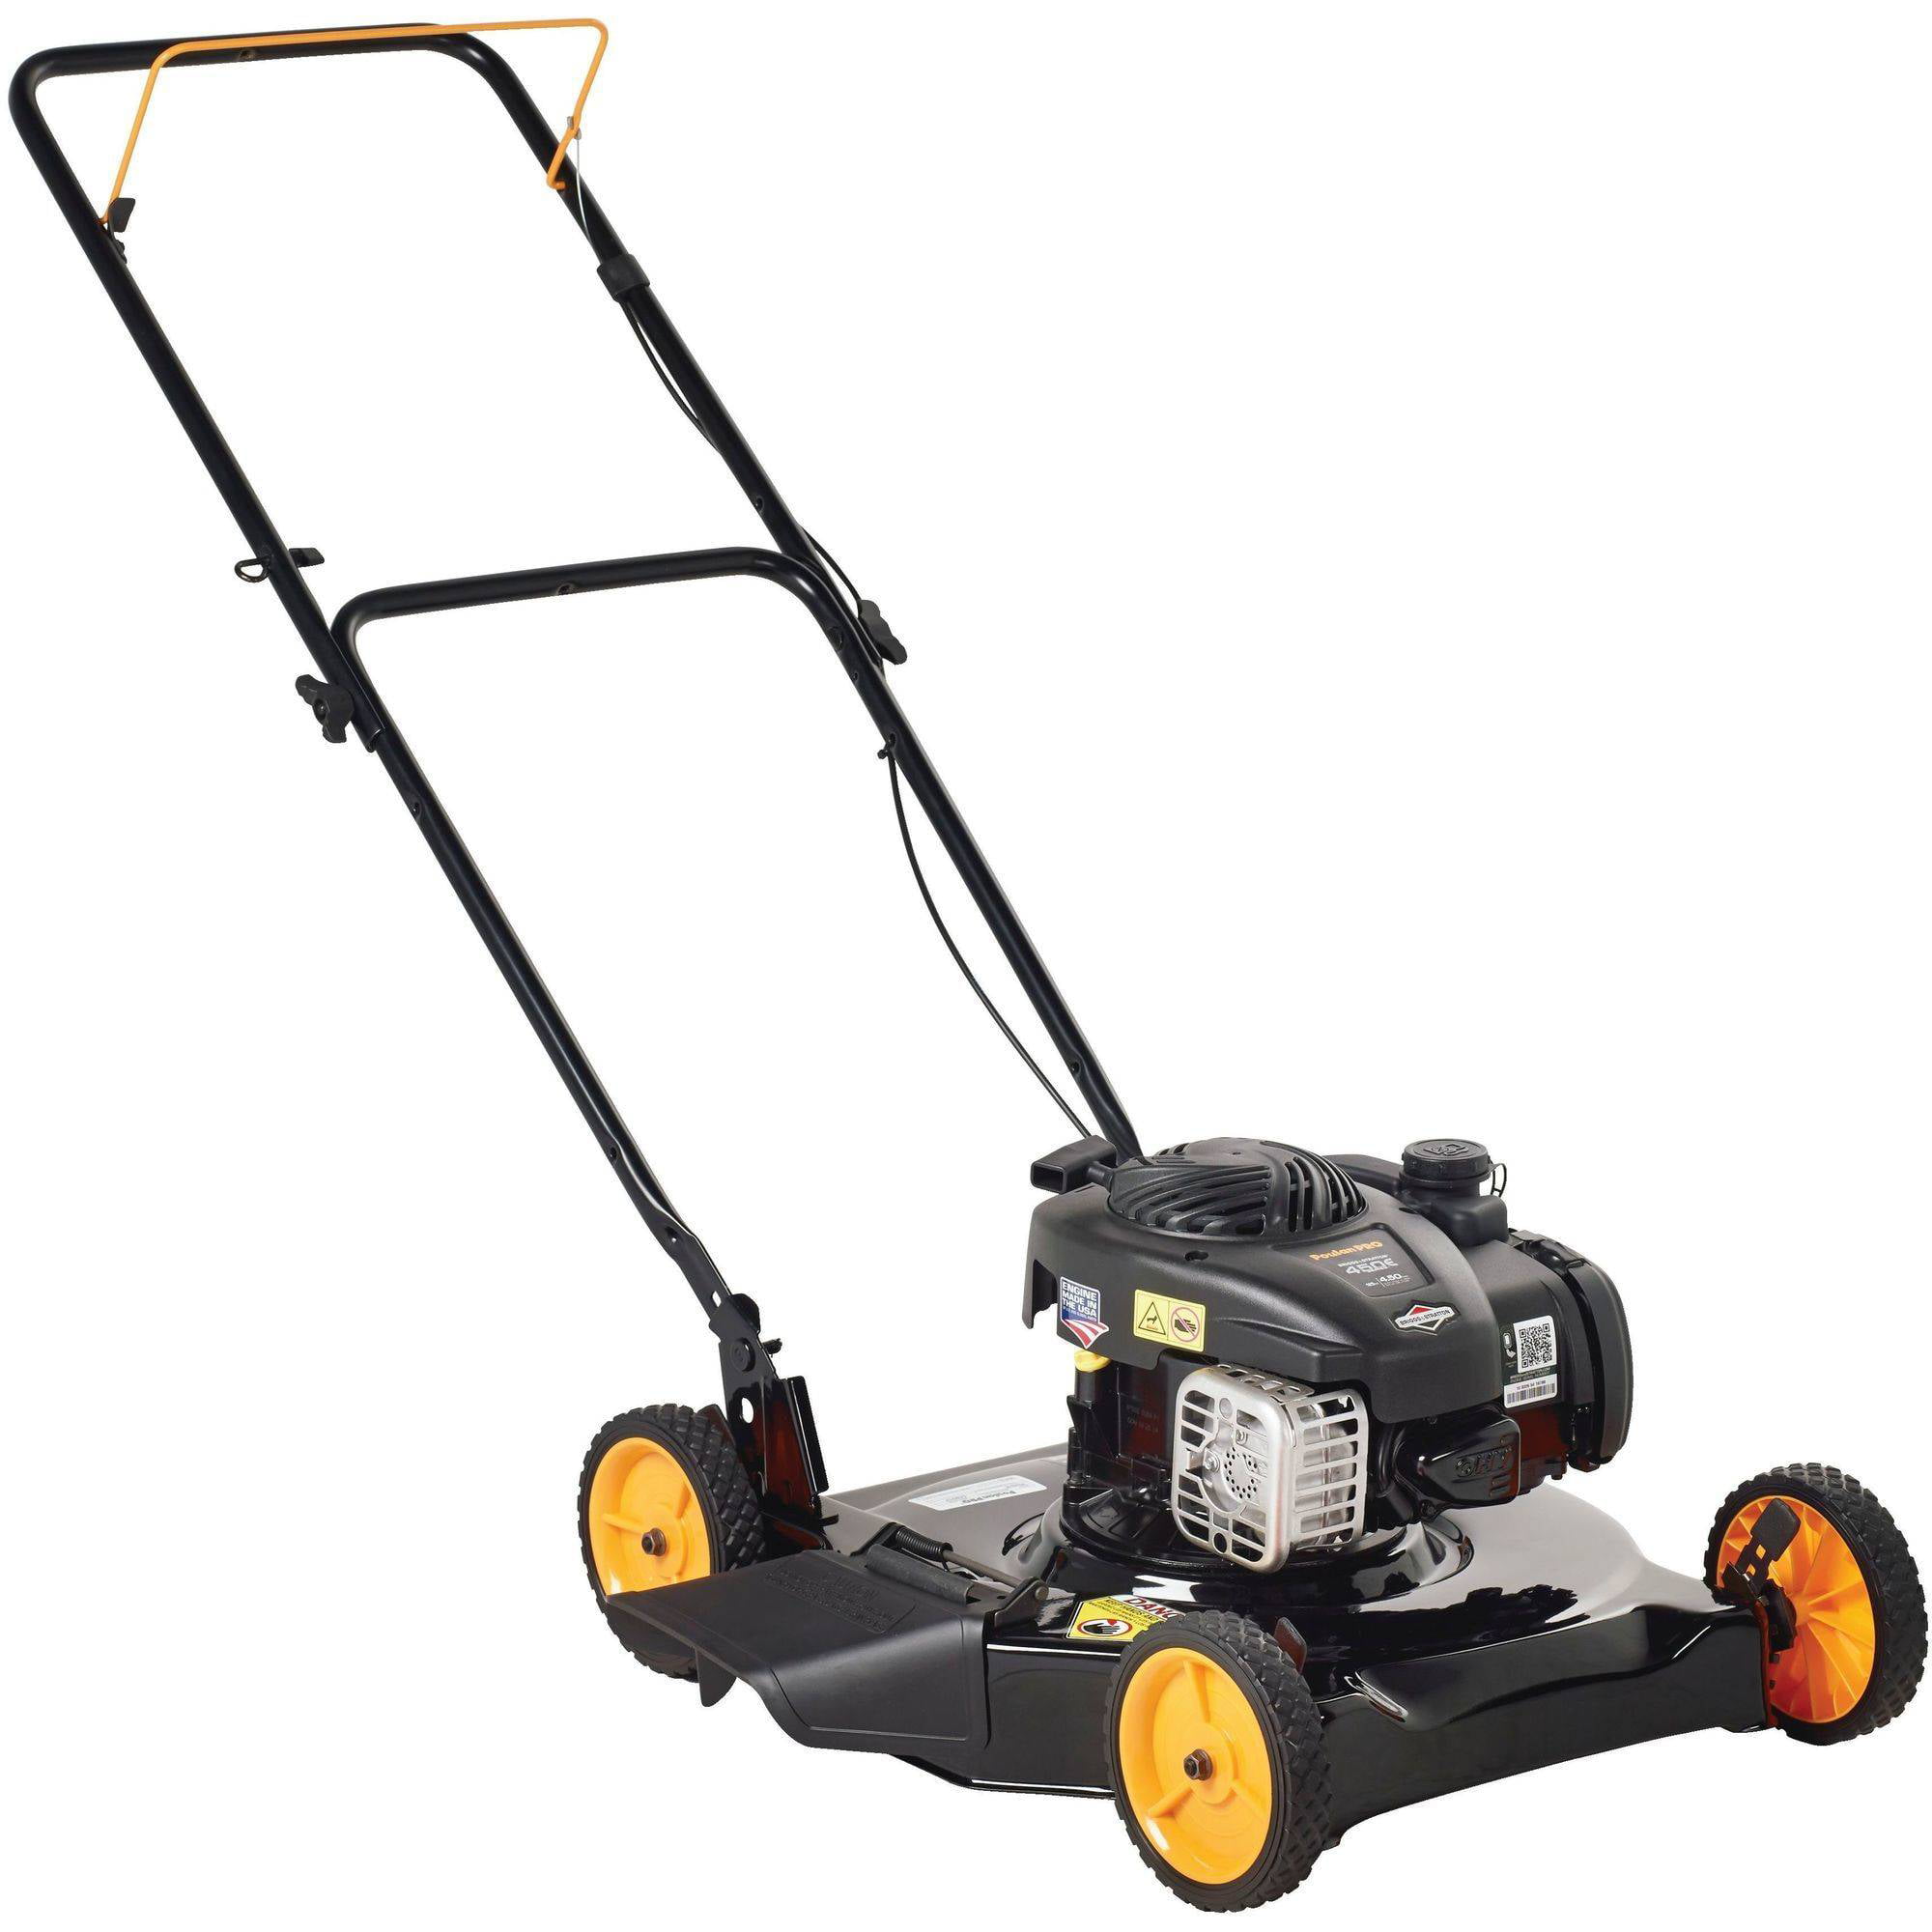 Poulan Pro 20" 125cc Gas Powered Side Discharged Push Lawn Mower